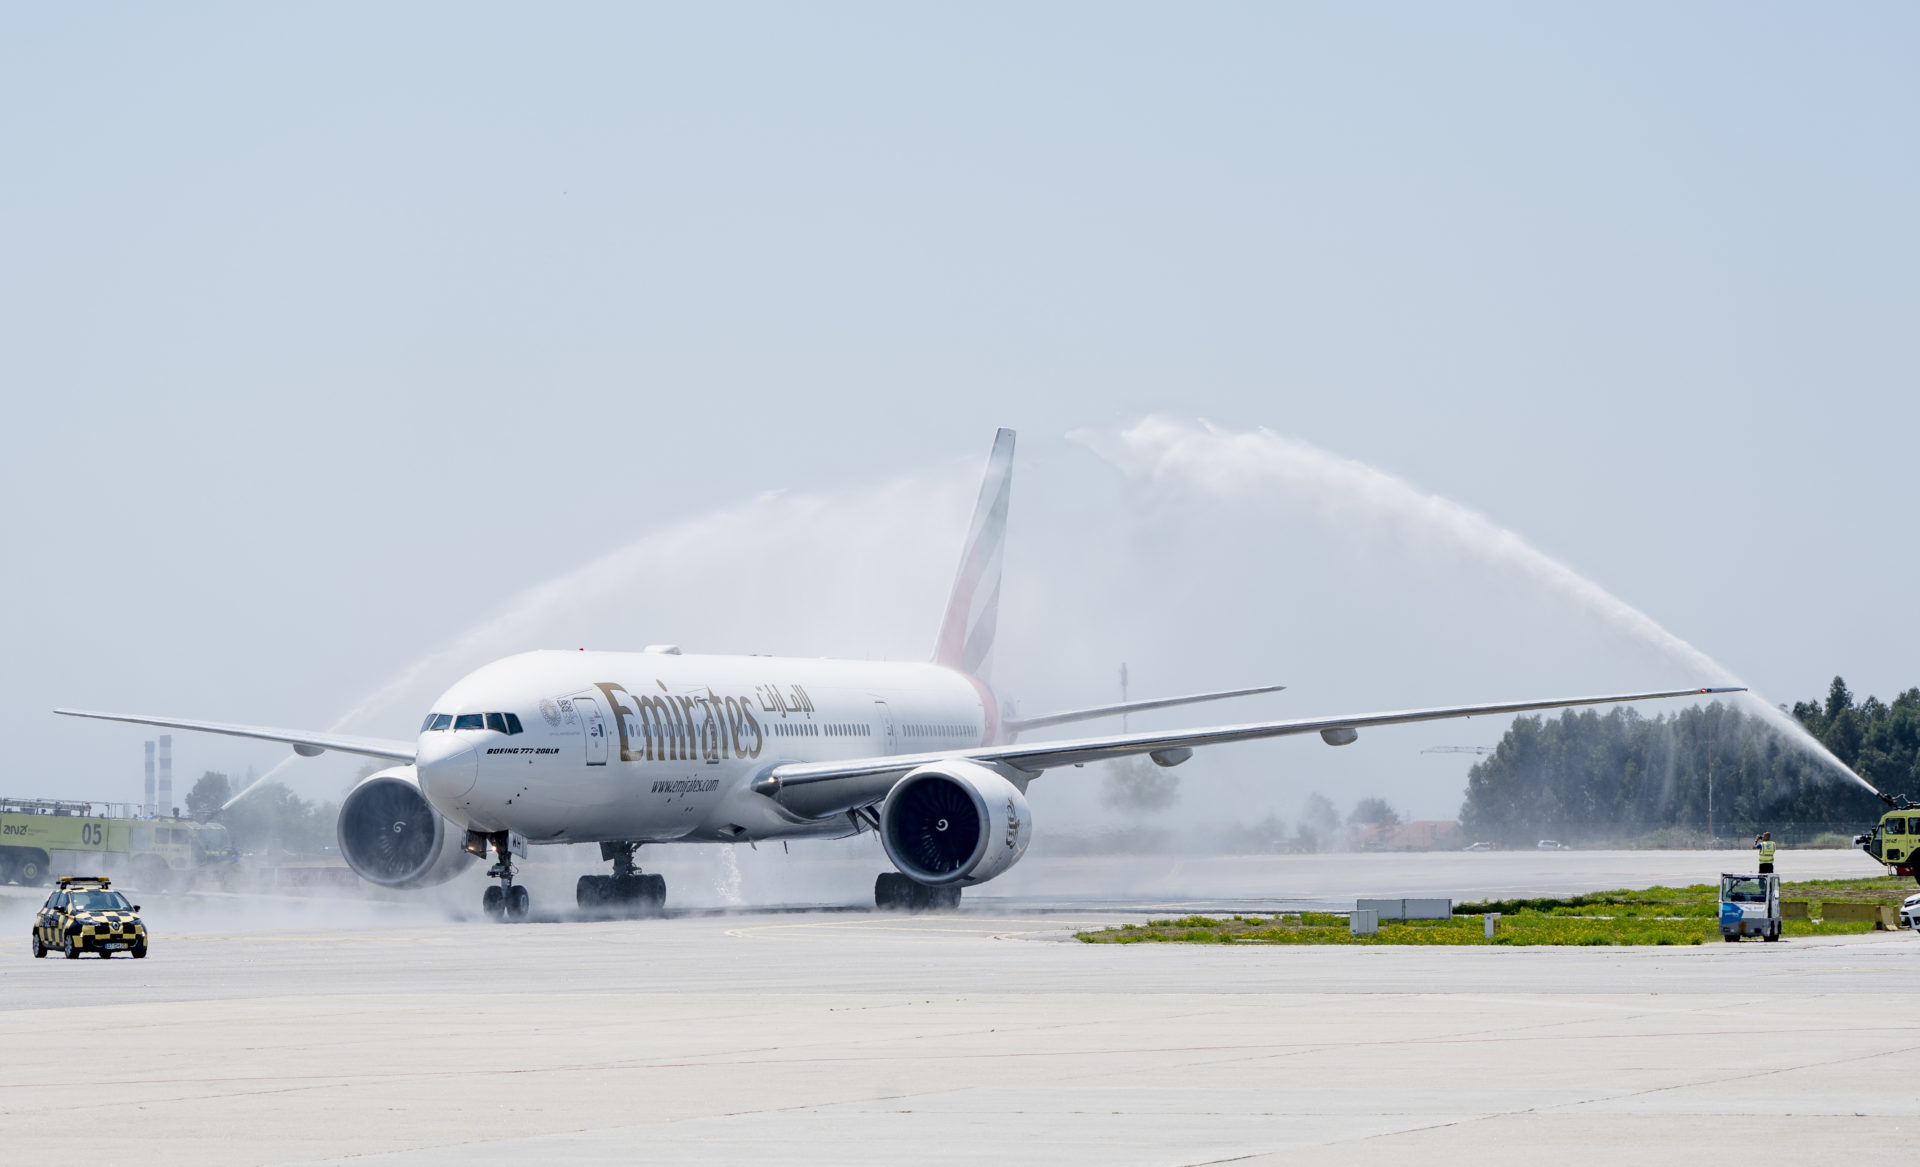 PRT- 02JUL2019 •	Emirates’ Boeing 777-300ER is welcomed with a water cannon salute after touchdown at Porto Airport today for the airline’s newest service launch.
 Photo by Rui Coutinho